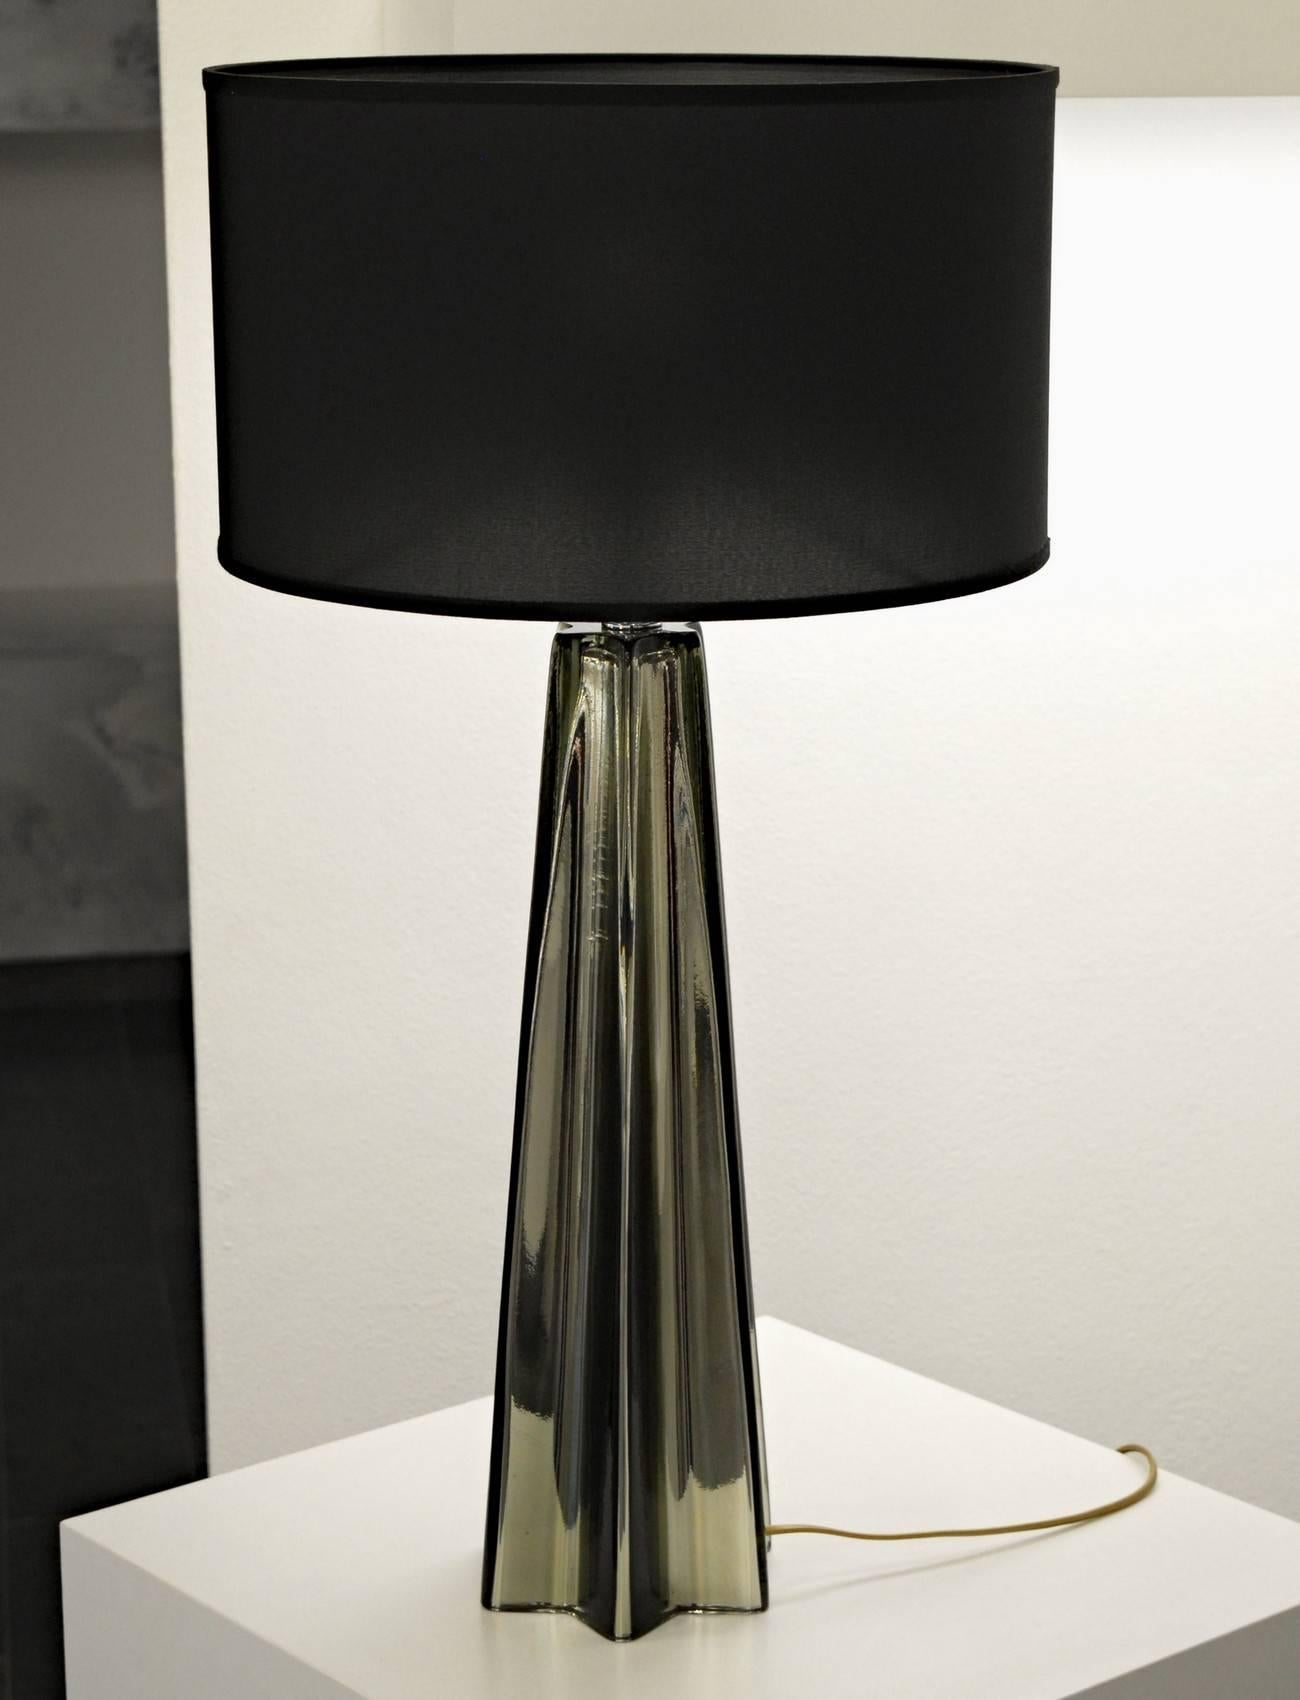 Fashionable pair of tall table lamp from Alberto Donà in Murano. Gray acciaio color layered inside with mirror mercury glass technique. Geometry of shape plays well with light reflection making a wonderful effect when the shaded lamp is lit.